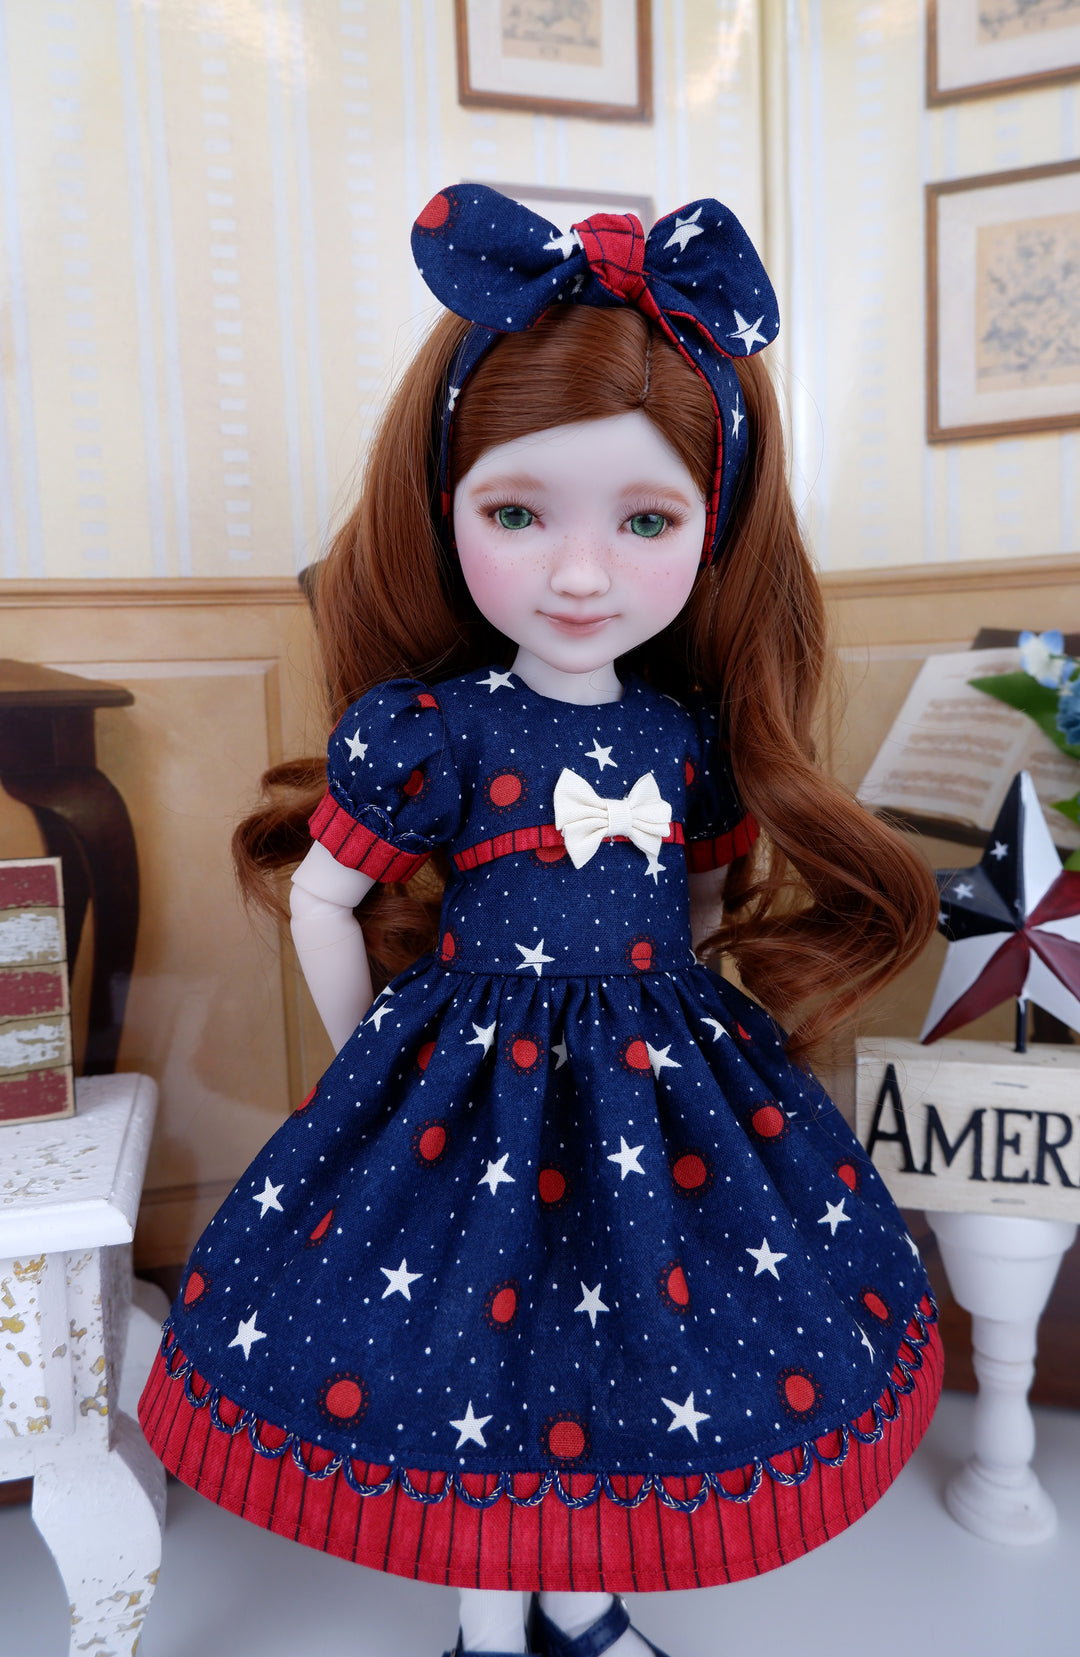 Miss Liberty - dress and shoes for Ruby Red Fashion Friends doll